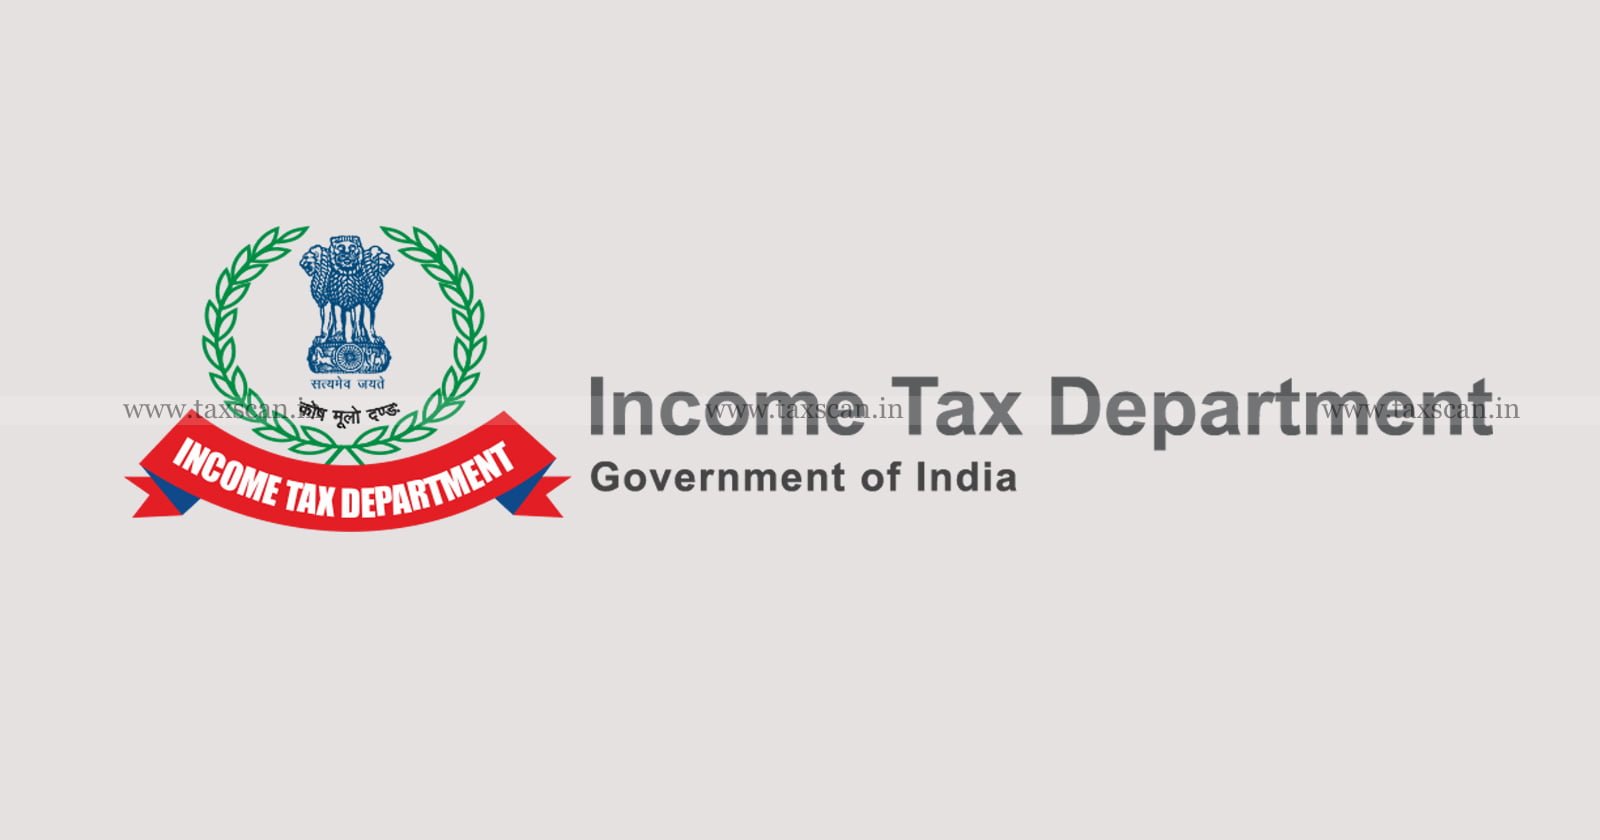 Tax Authorities - justice - ITAT - Income Tax Department - Income Tax - Tax - Arbitrary Use of Power - Power - Taxscan